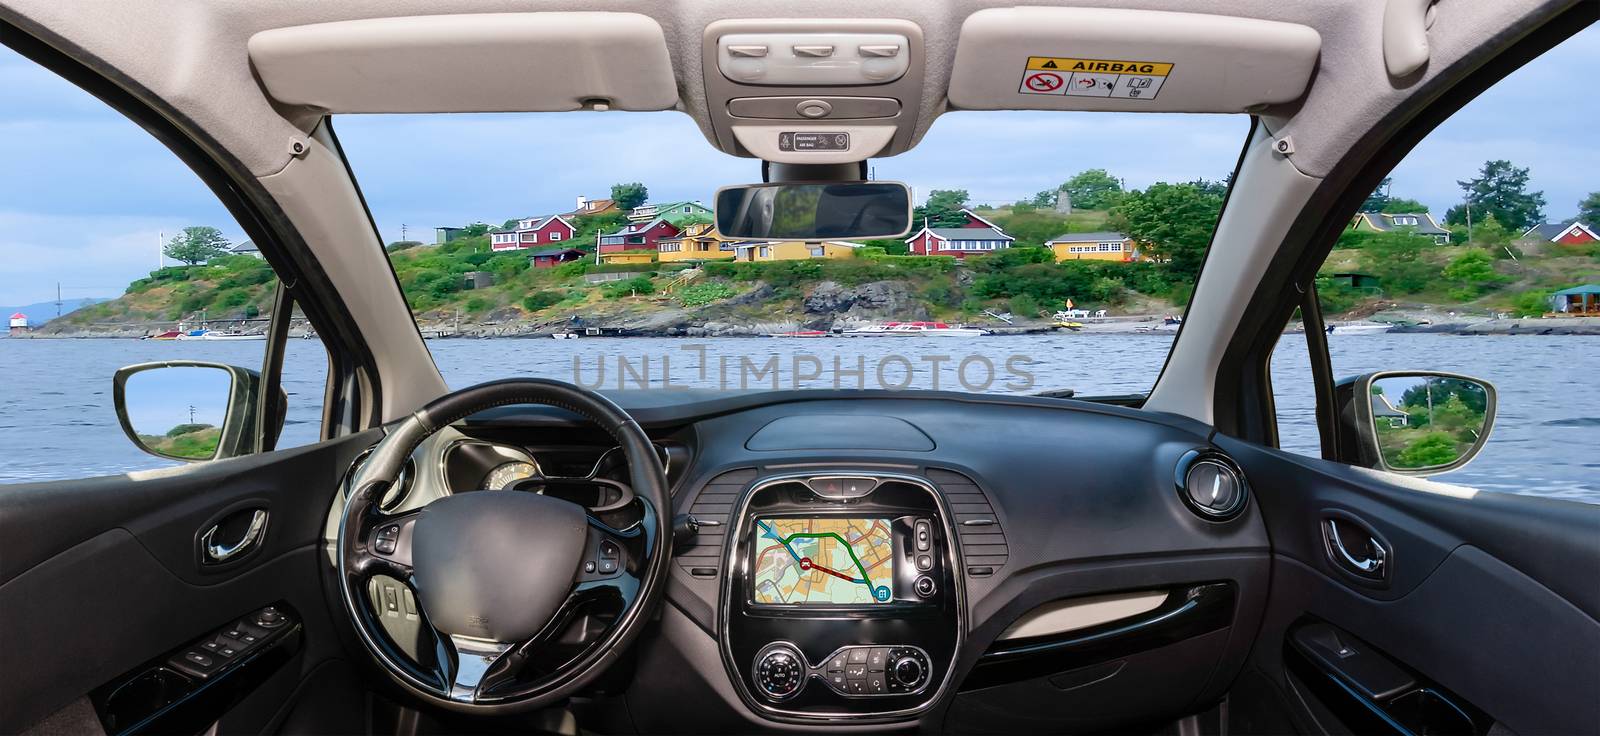 Car windshield overlooking houses on the shore, Oslo fjord, Norw by marcorubino